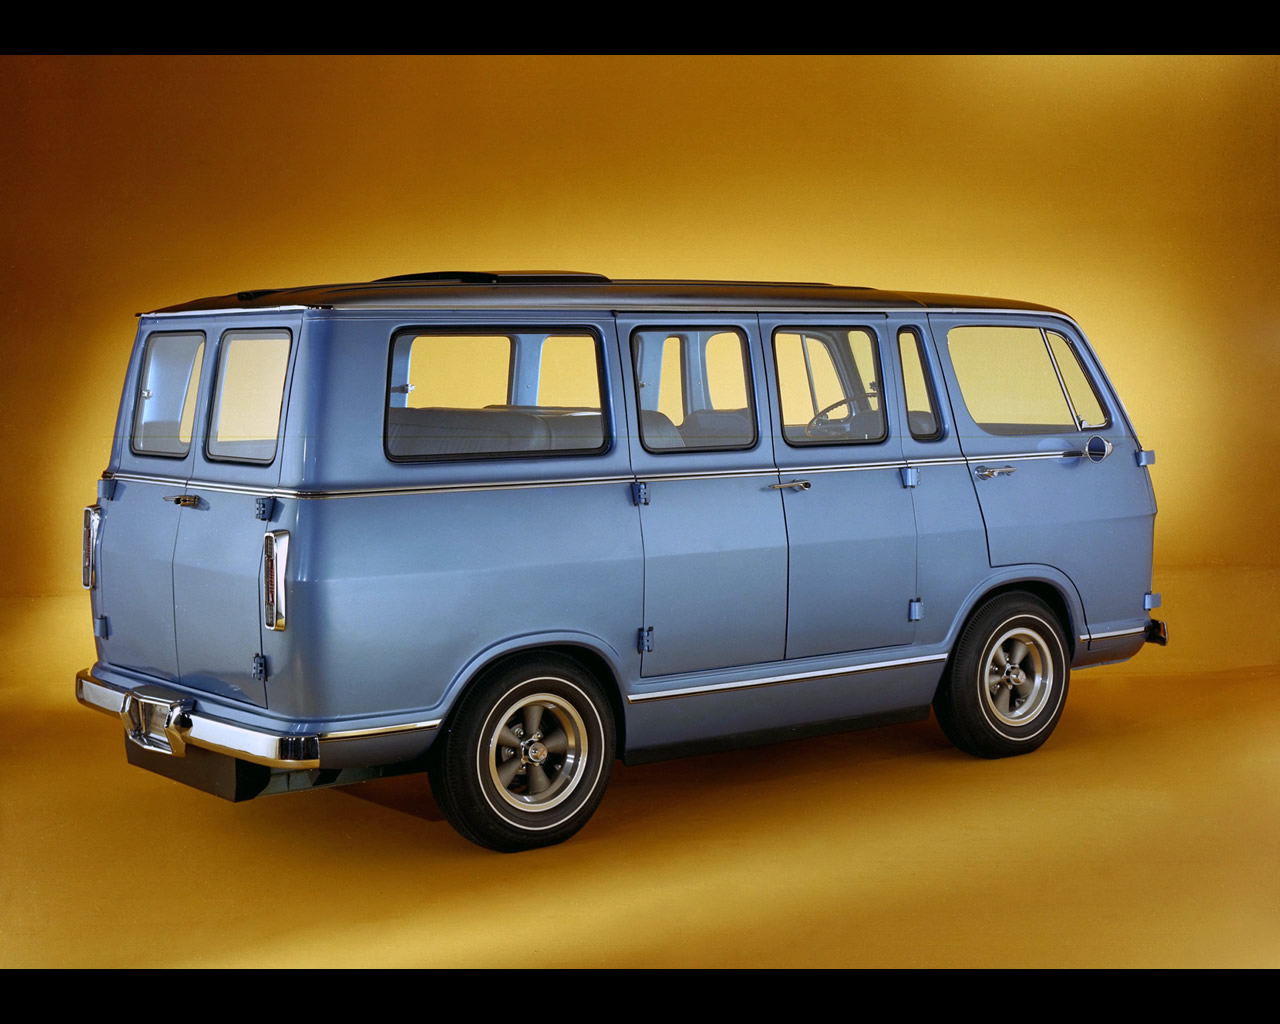 Hydrogen Fuel Cell Car in addition GMC Shorty Van For Sale. on 1966 gm 